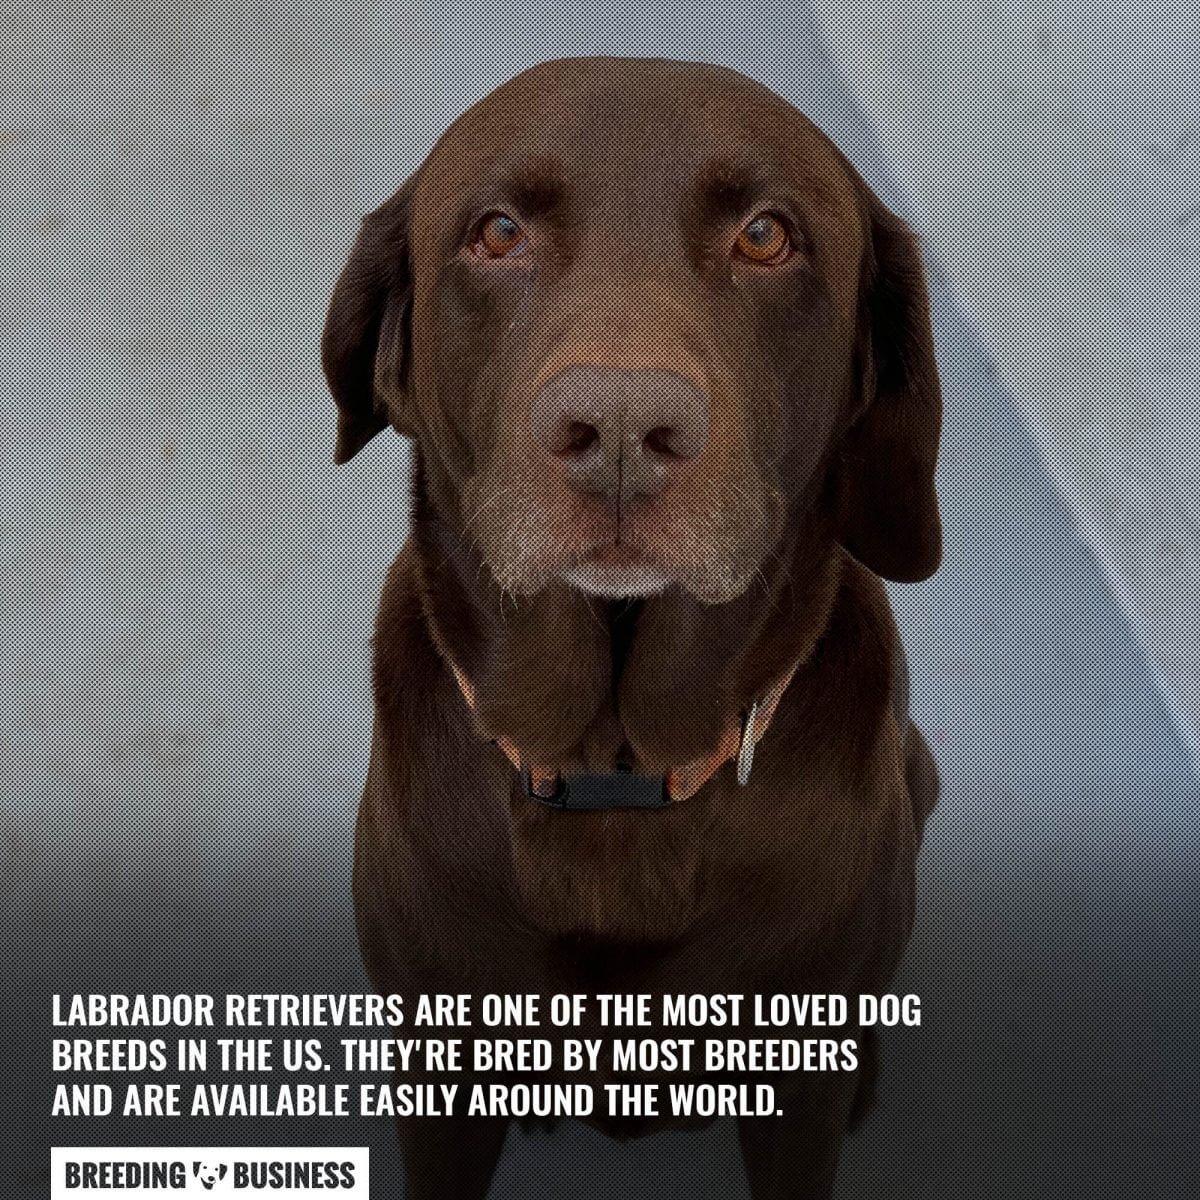 labrador retrievers are one of the most loved breeds